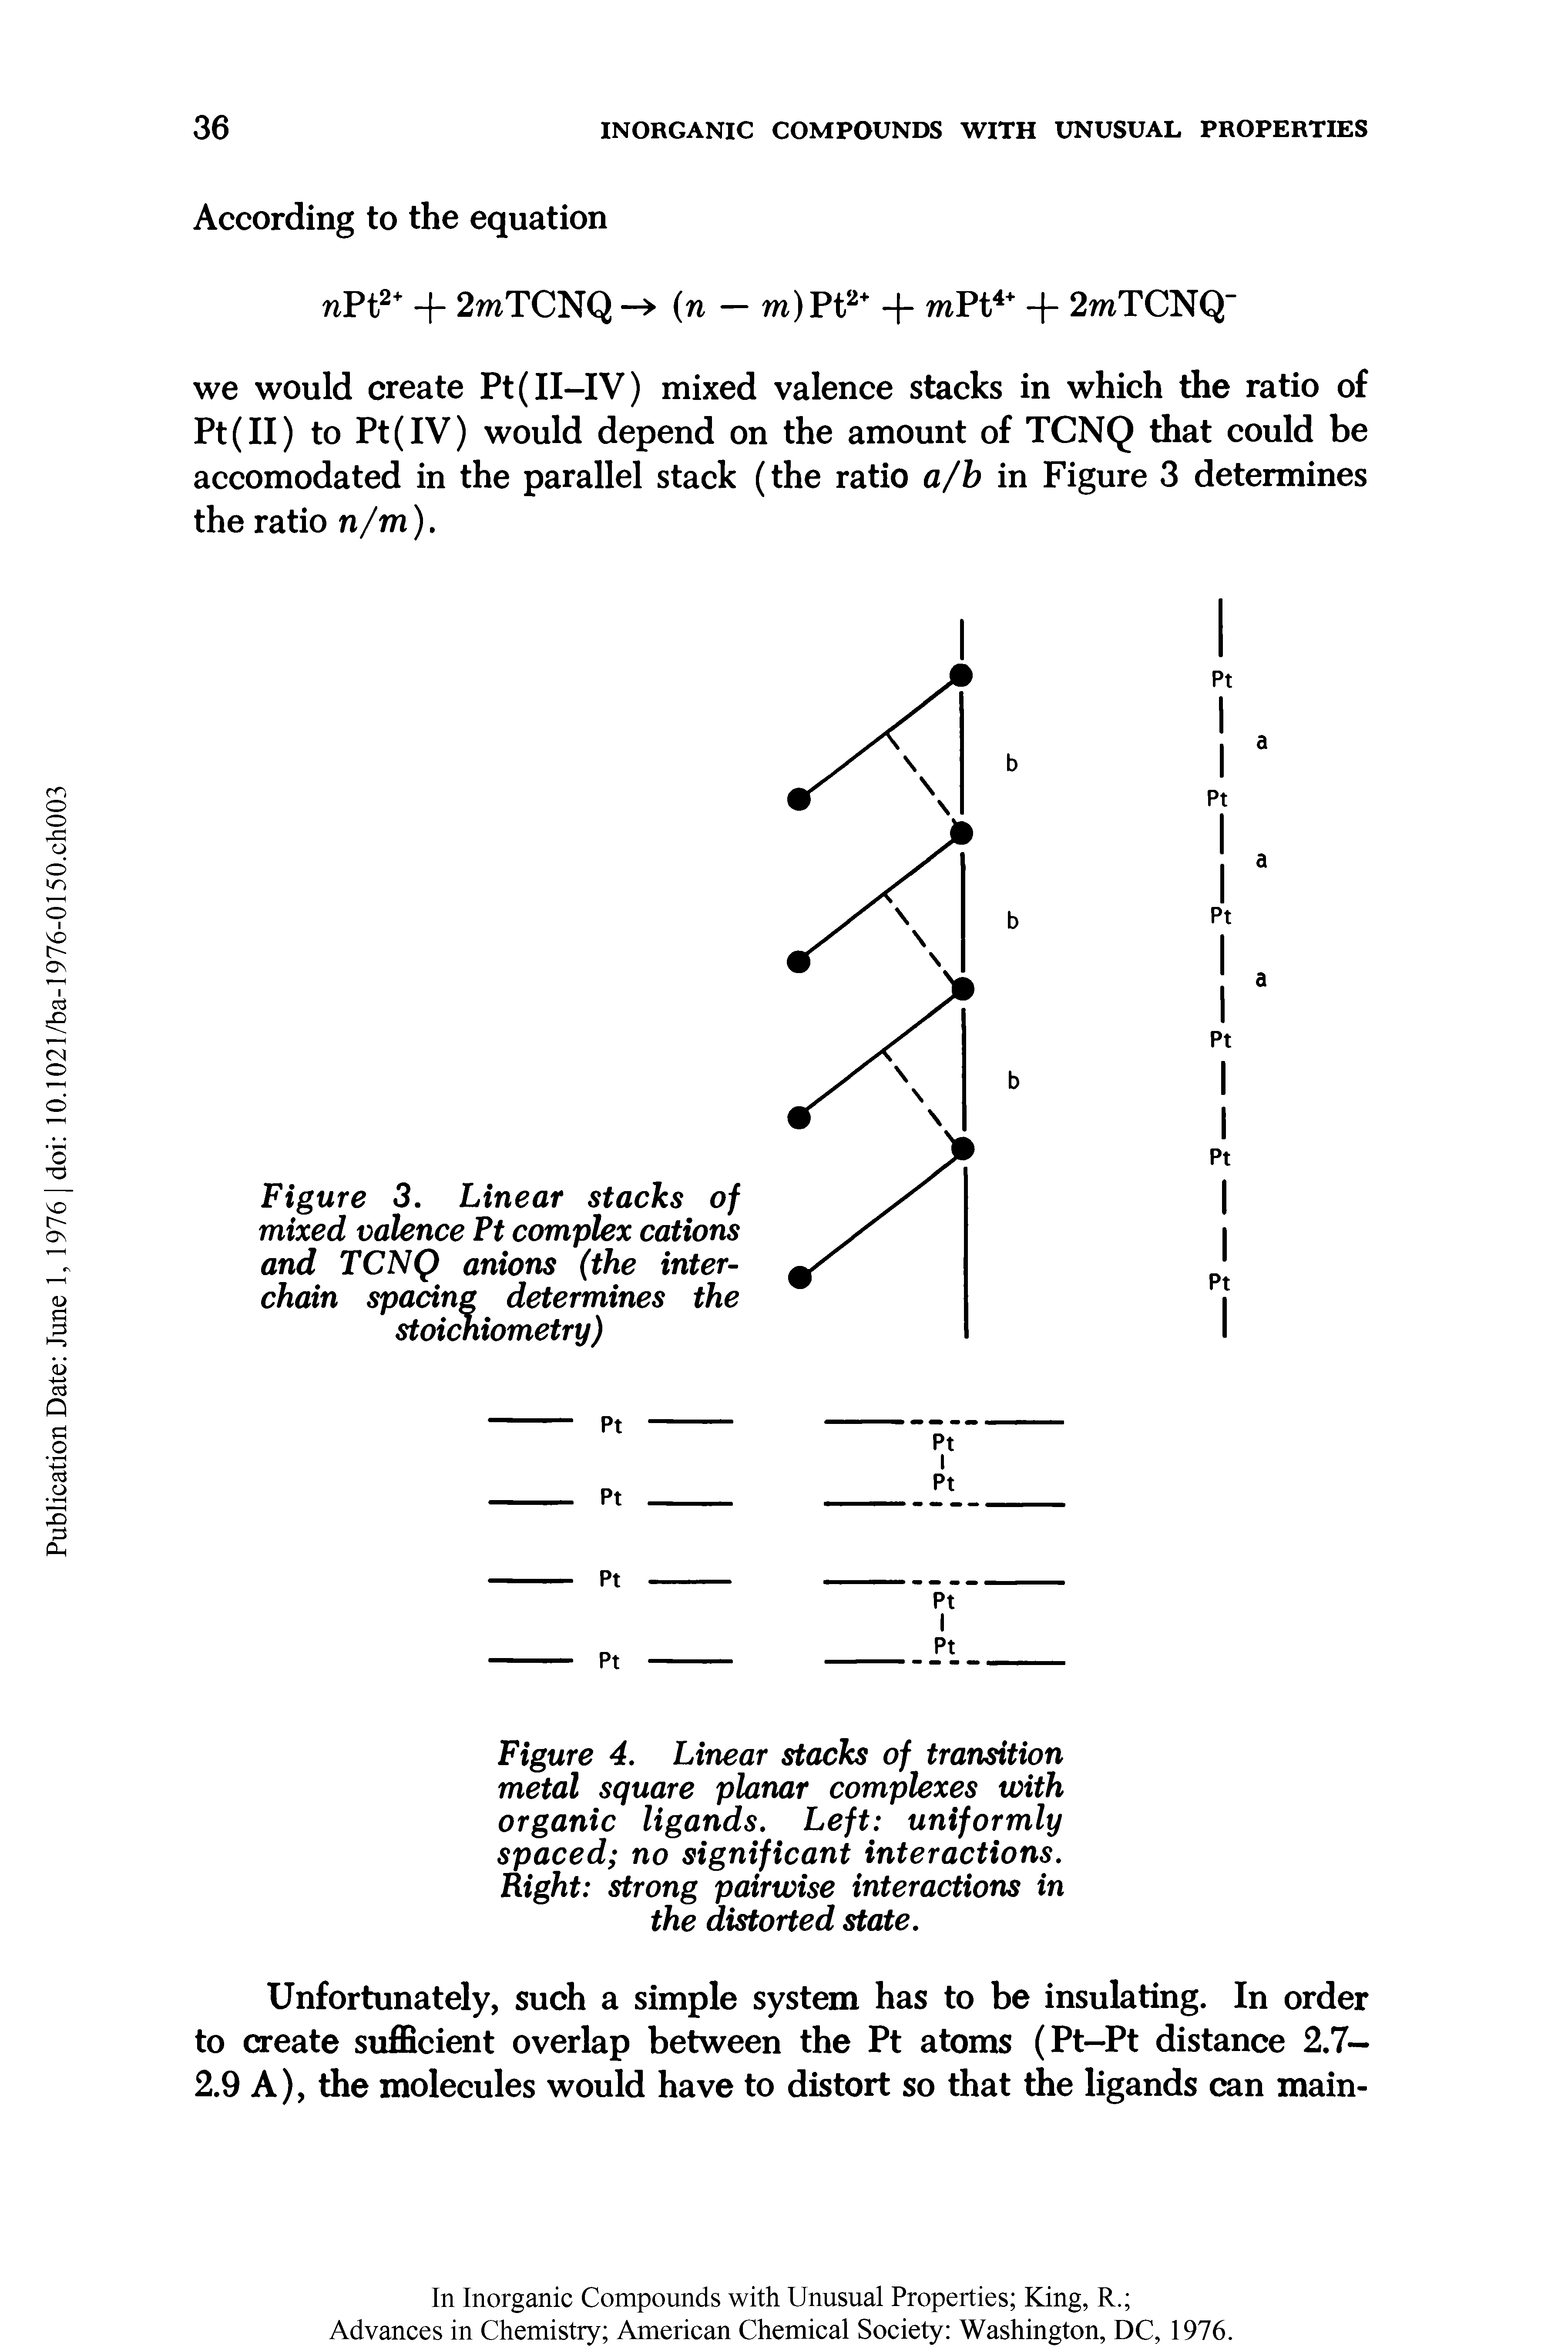 Figure 3. Linear stacks of mixed valence Ft complex cations and TCNQ anions (the interchain spacing determines the stoichiometry)...